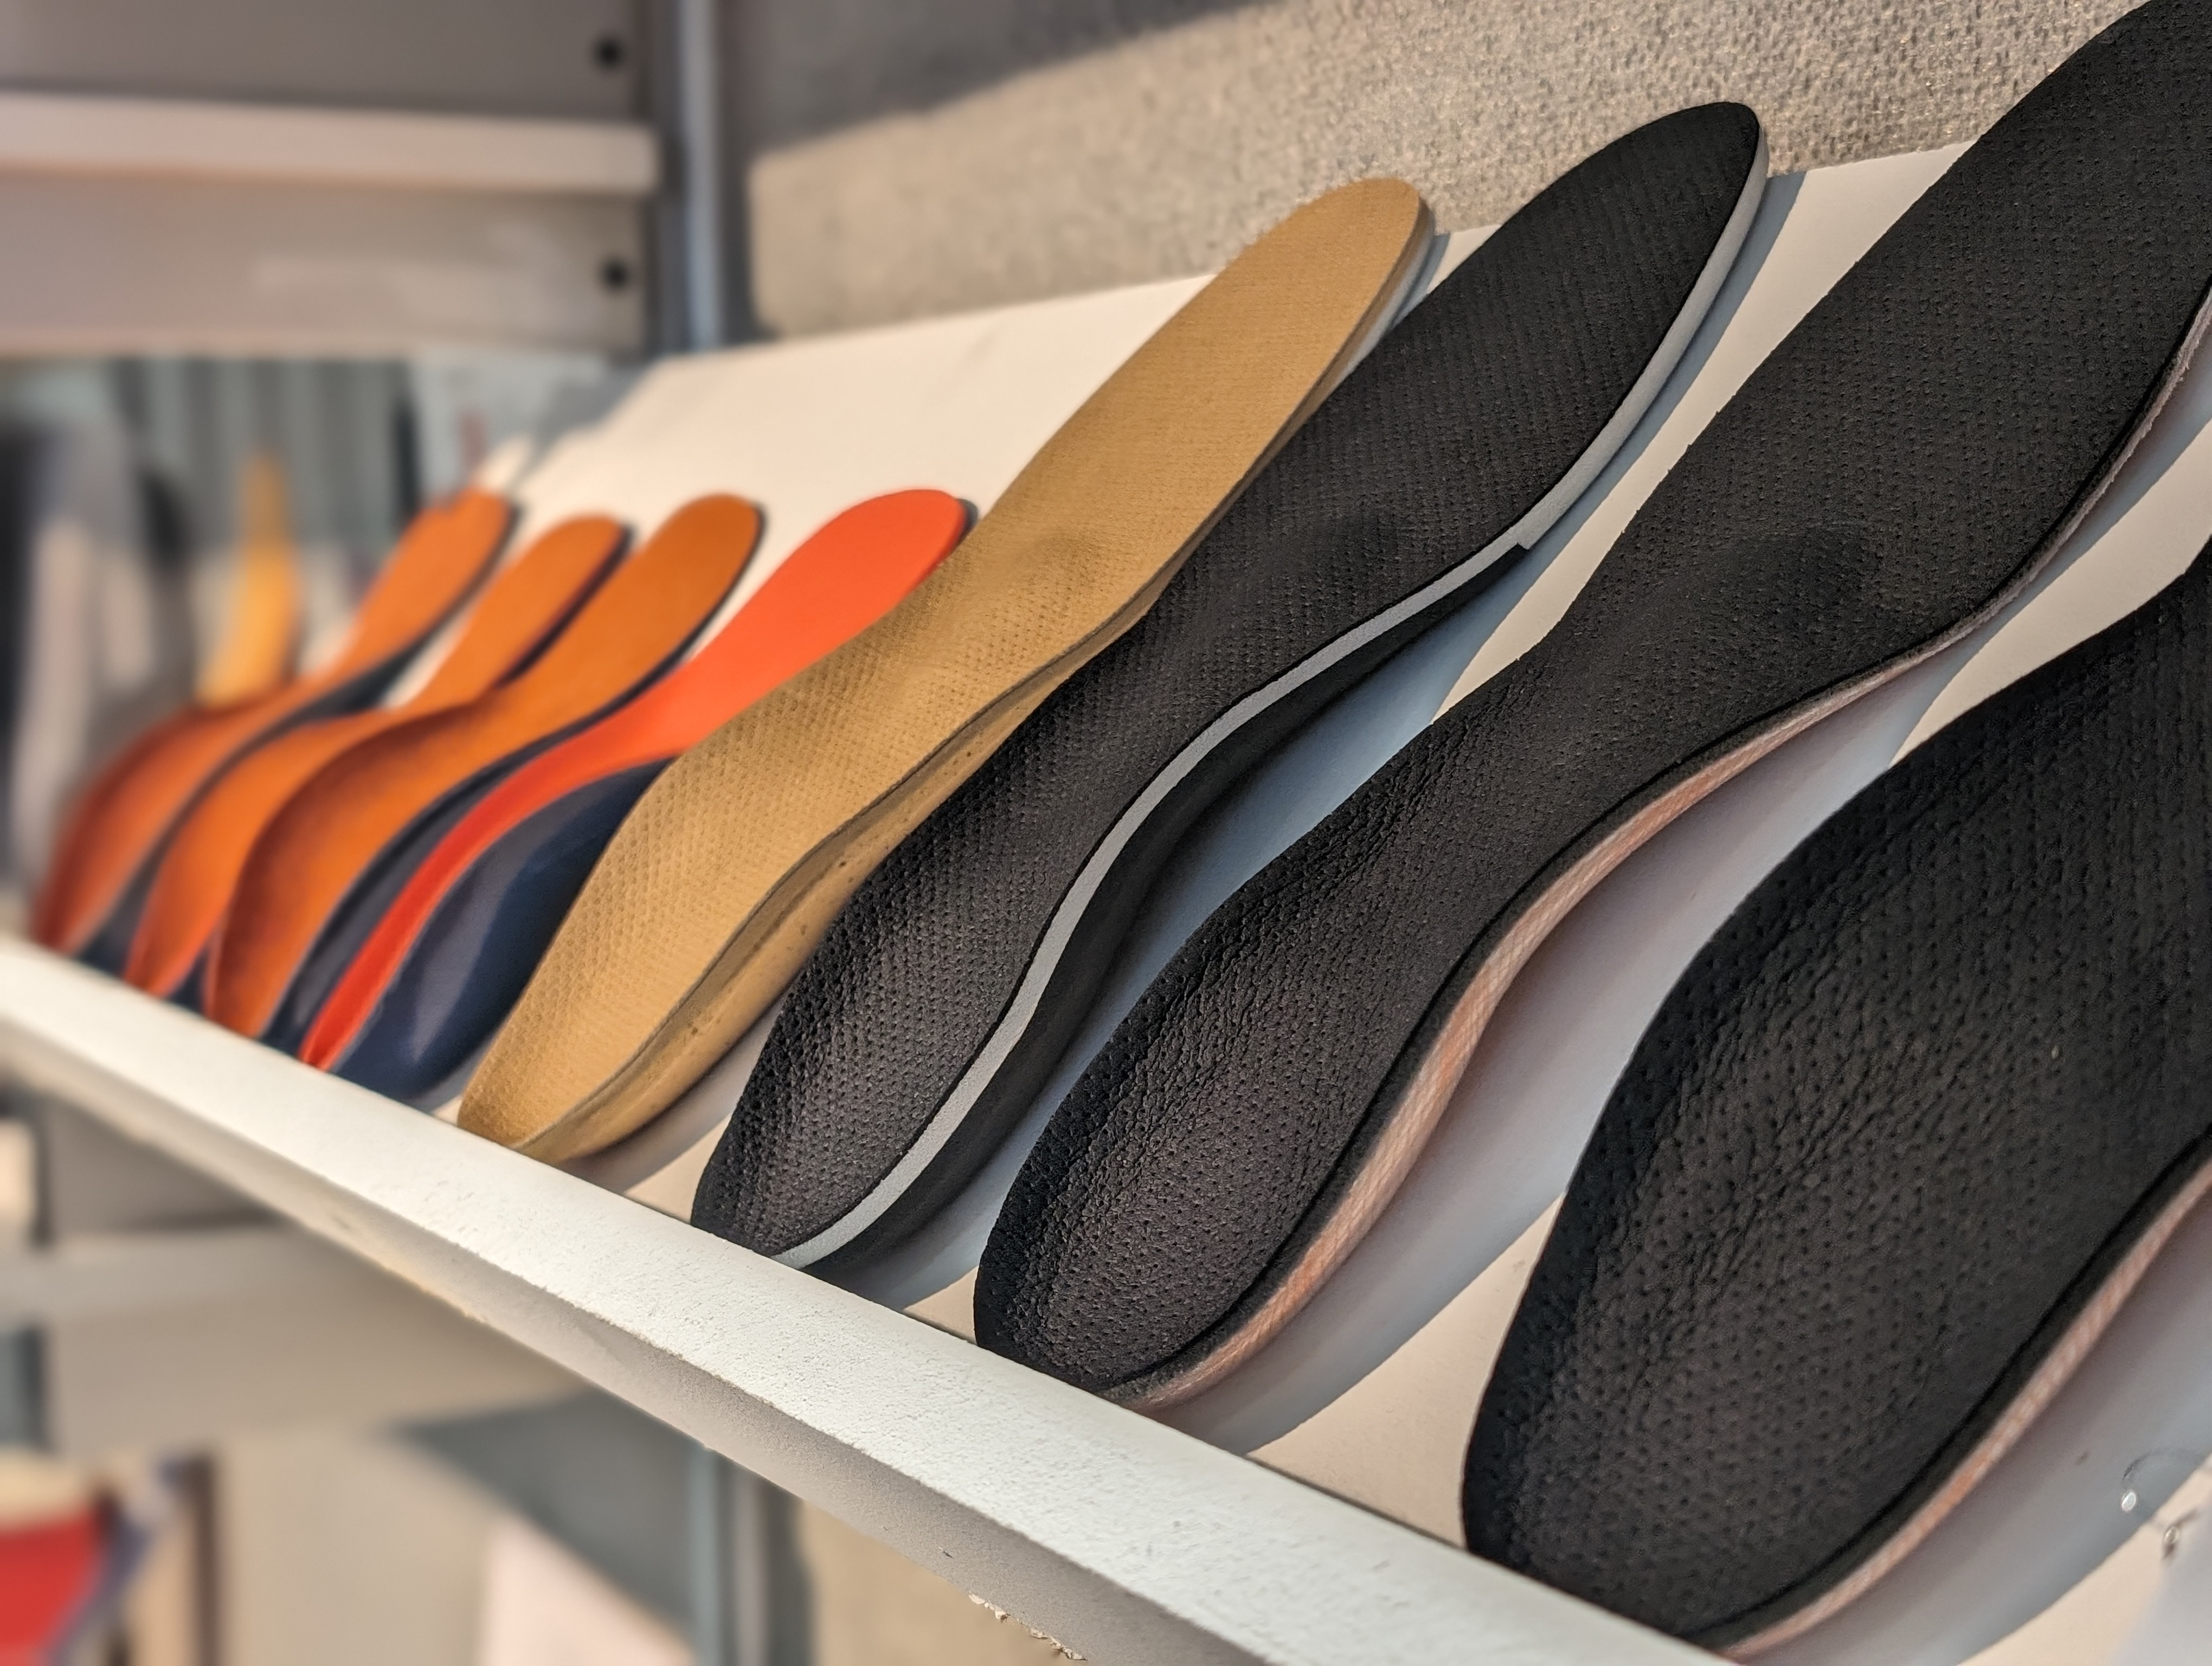 insoles at royal college of podiatry conference